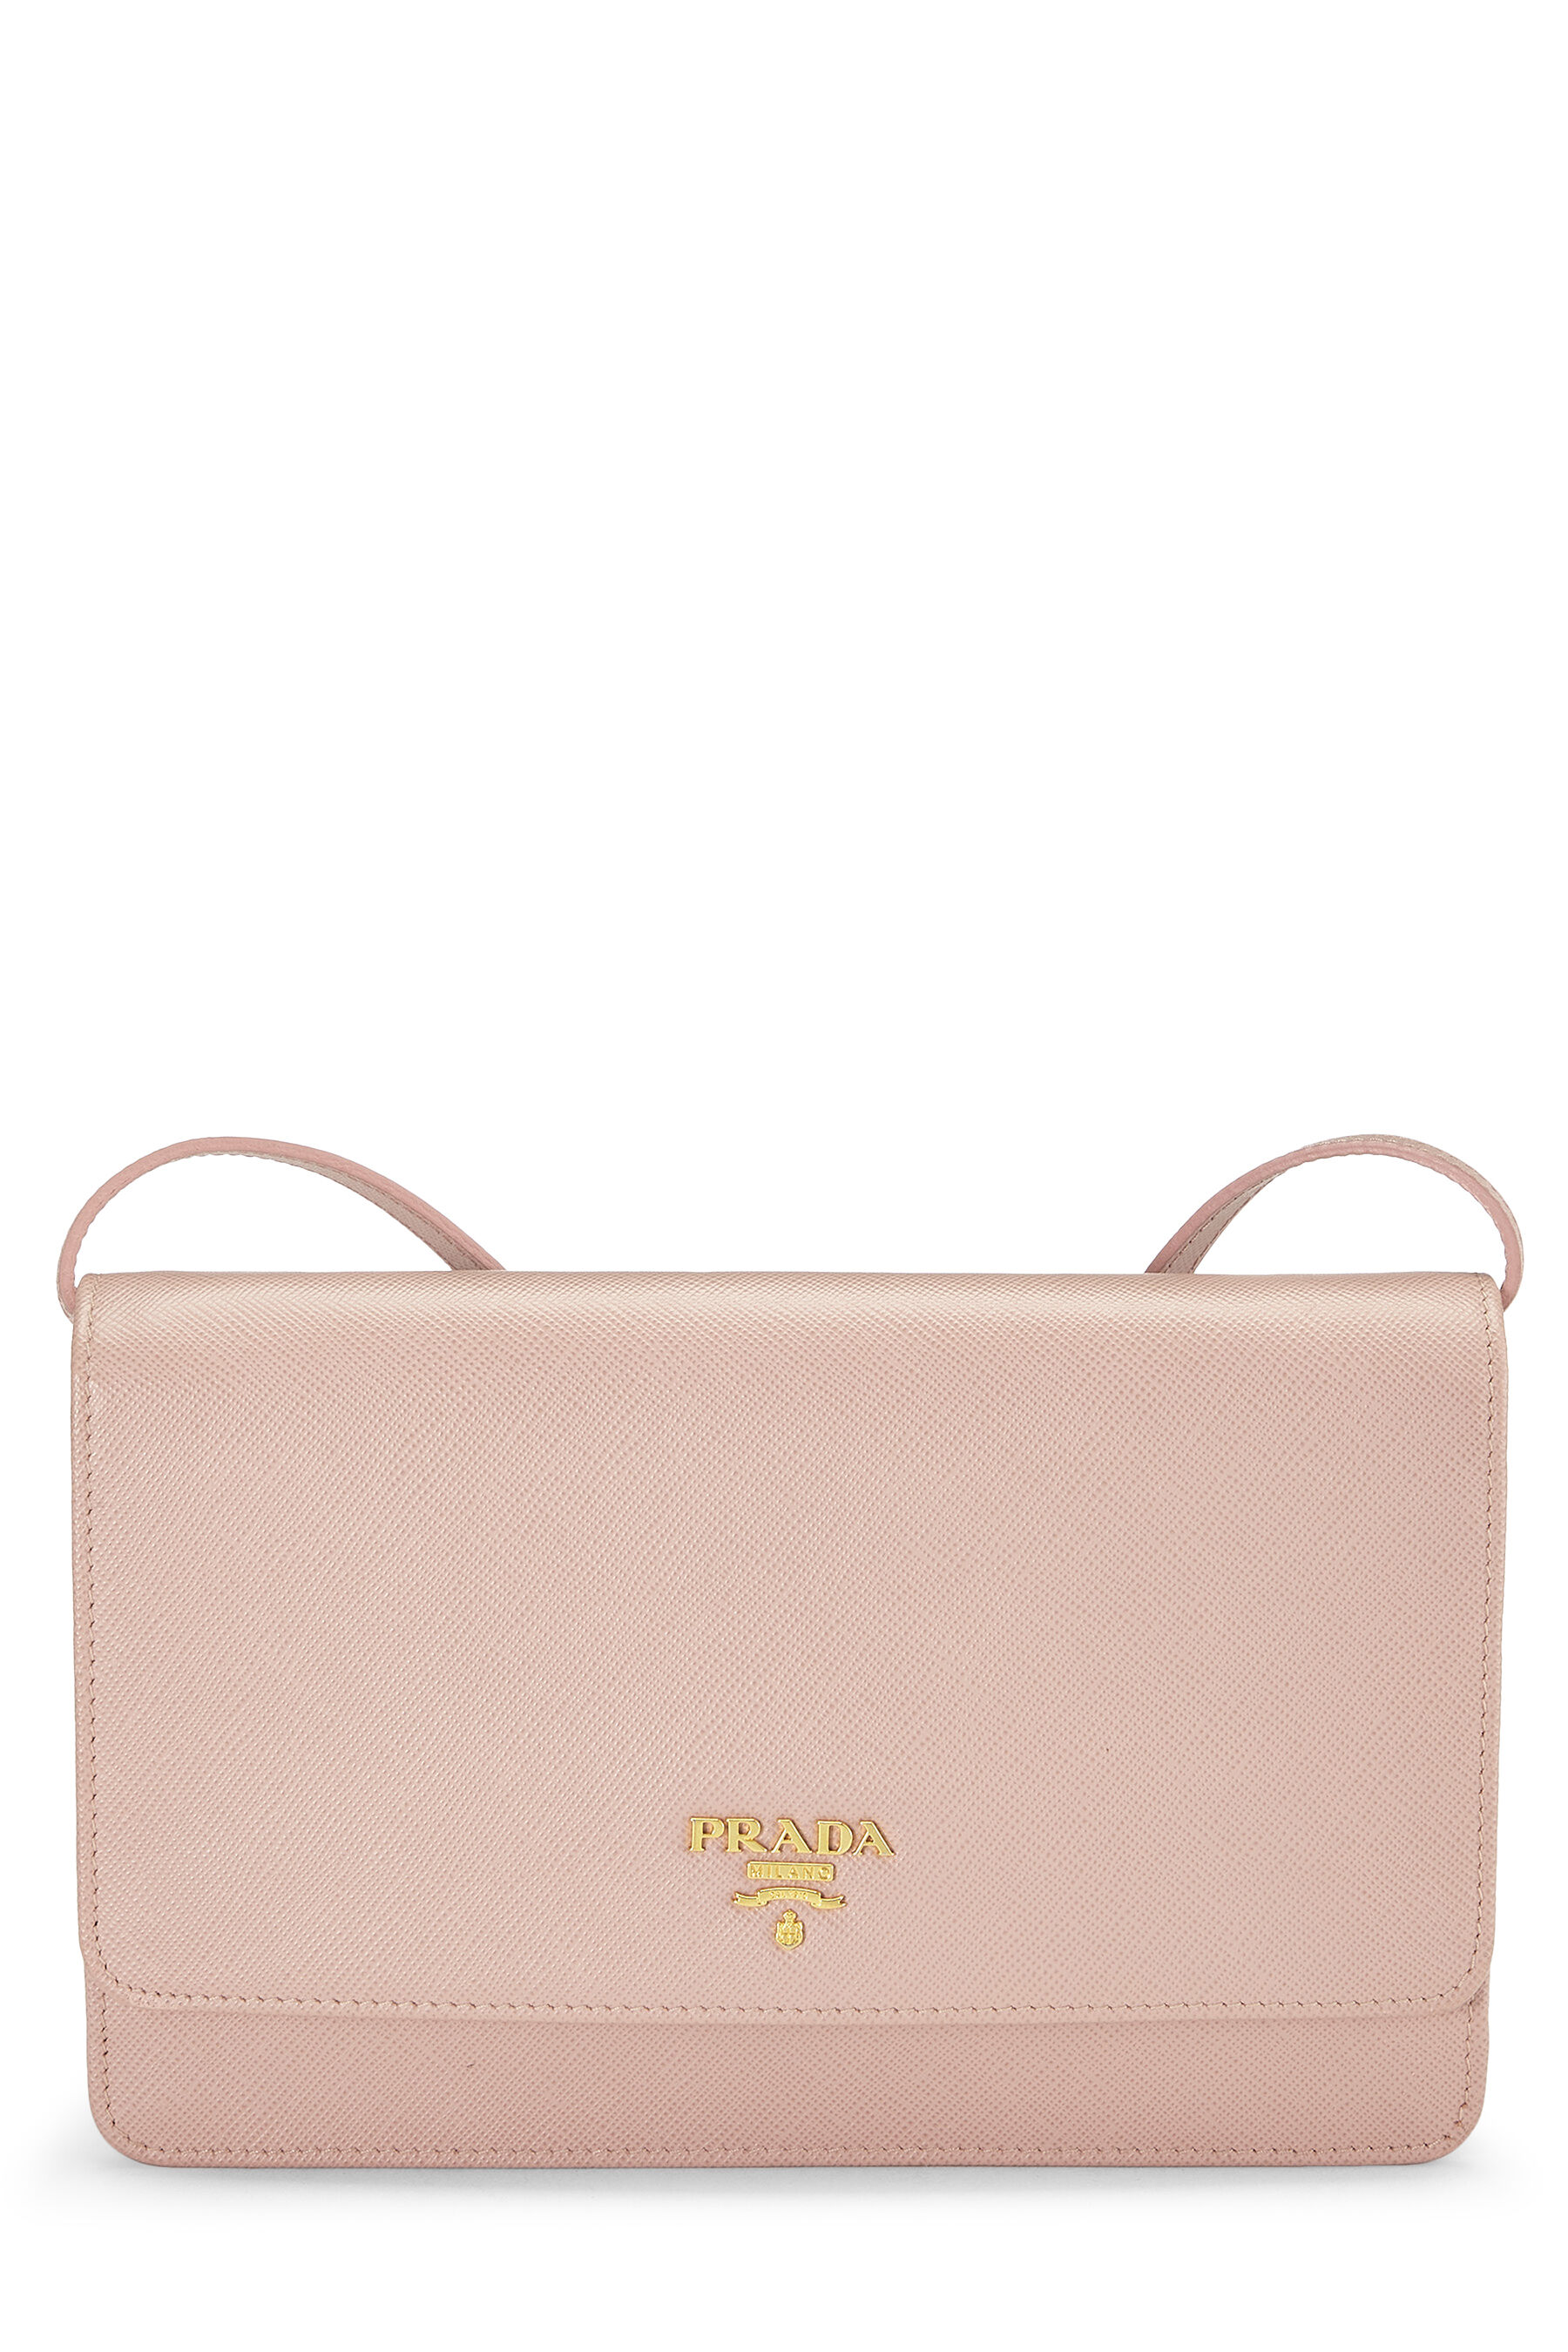 PRADA Pink Gold Saffiano Leather Wallet on Strap Clutch With Box